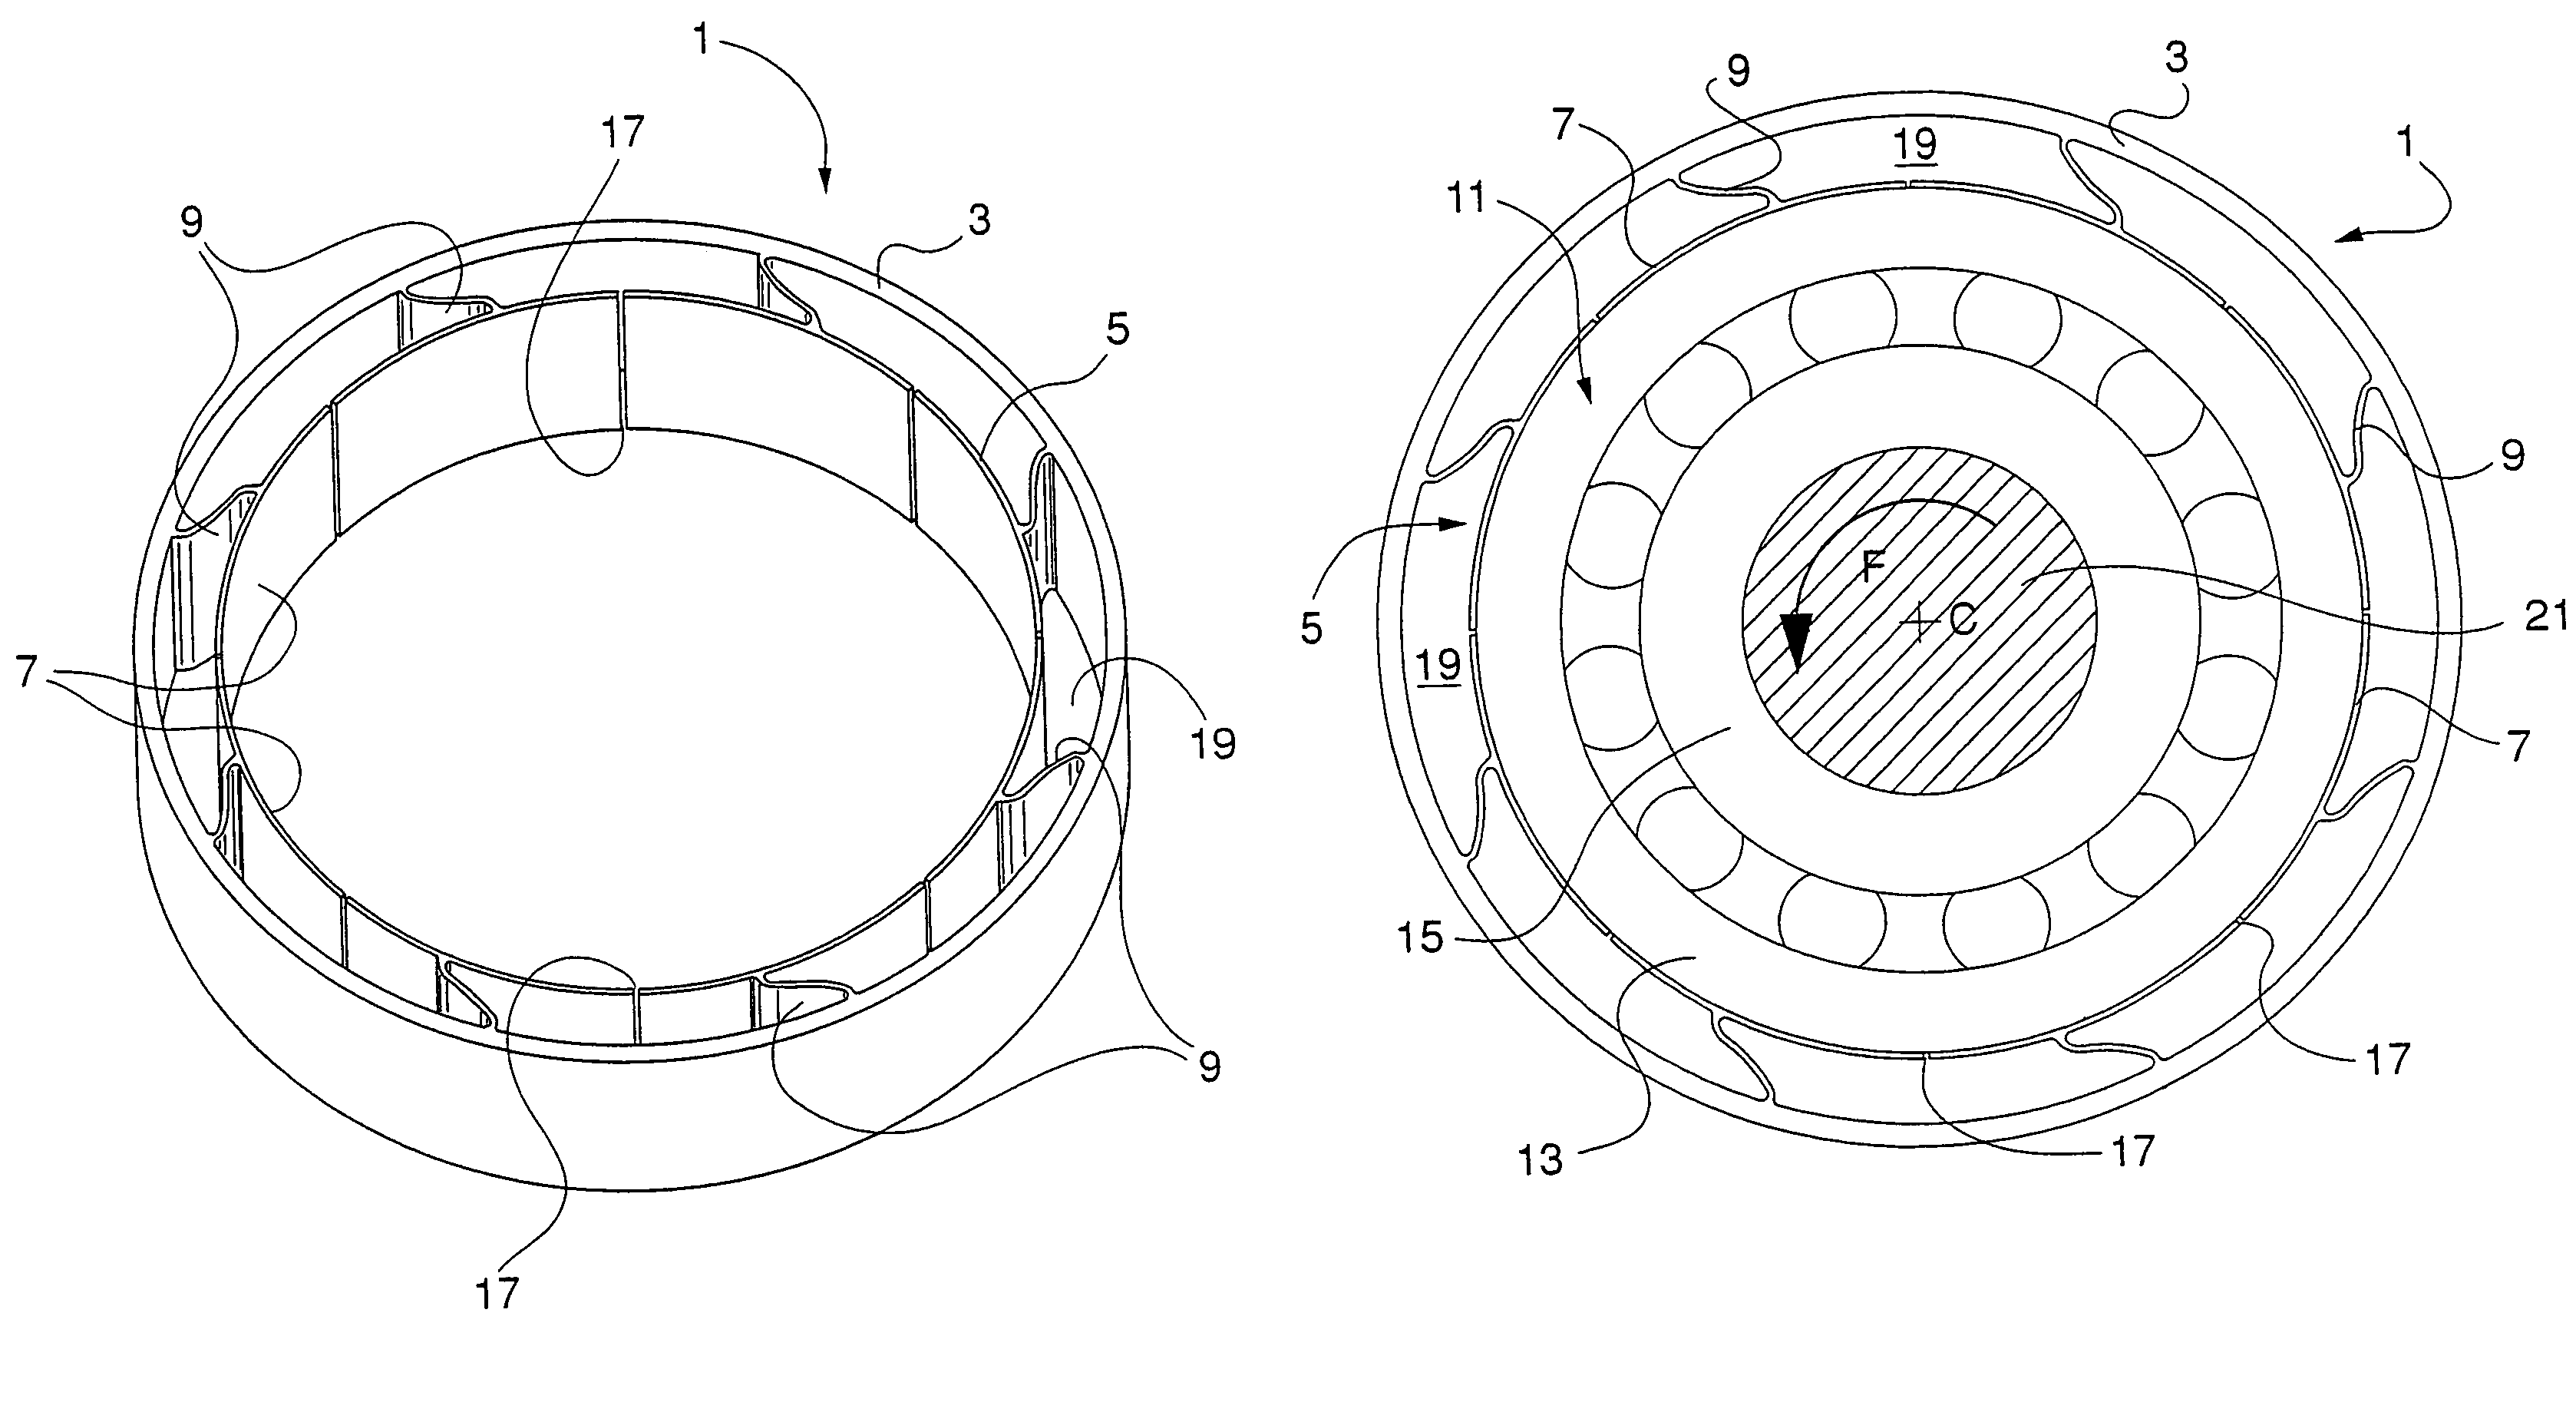 Annular support for rolling bearings